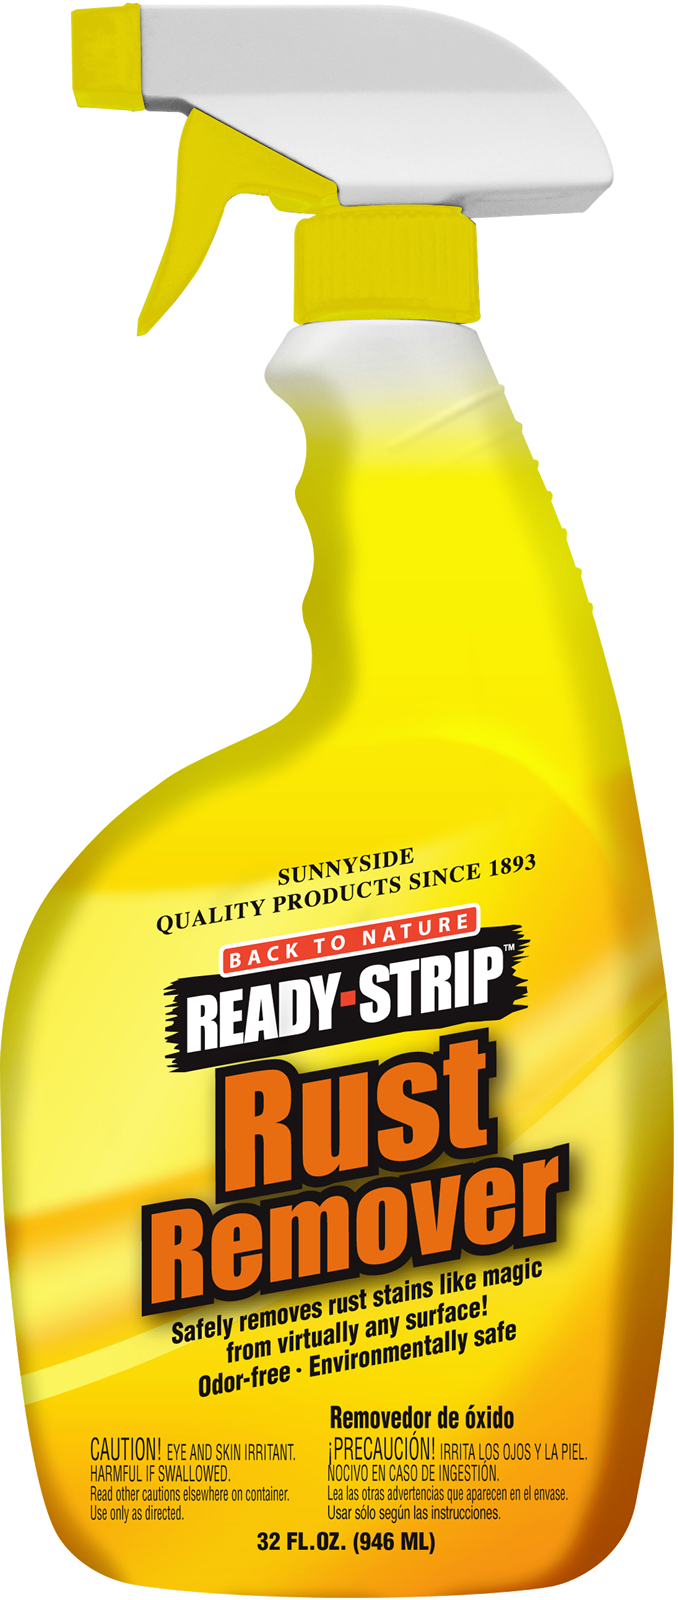 BACK TO NATURE READY-STRIP RUST REMOVER Product Image